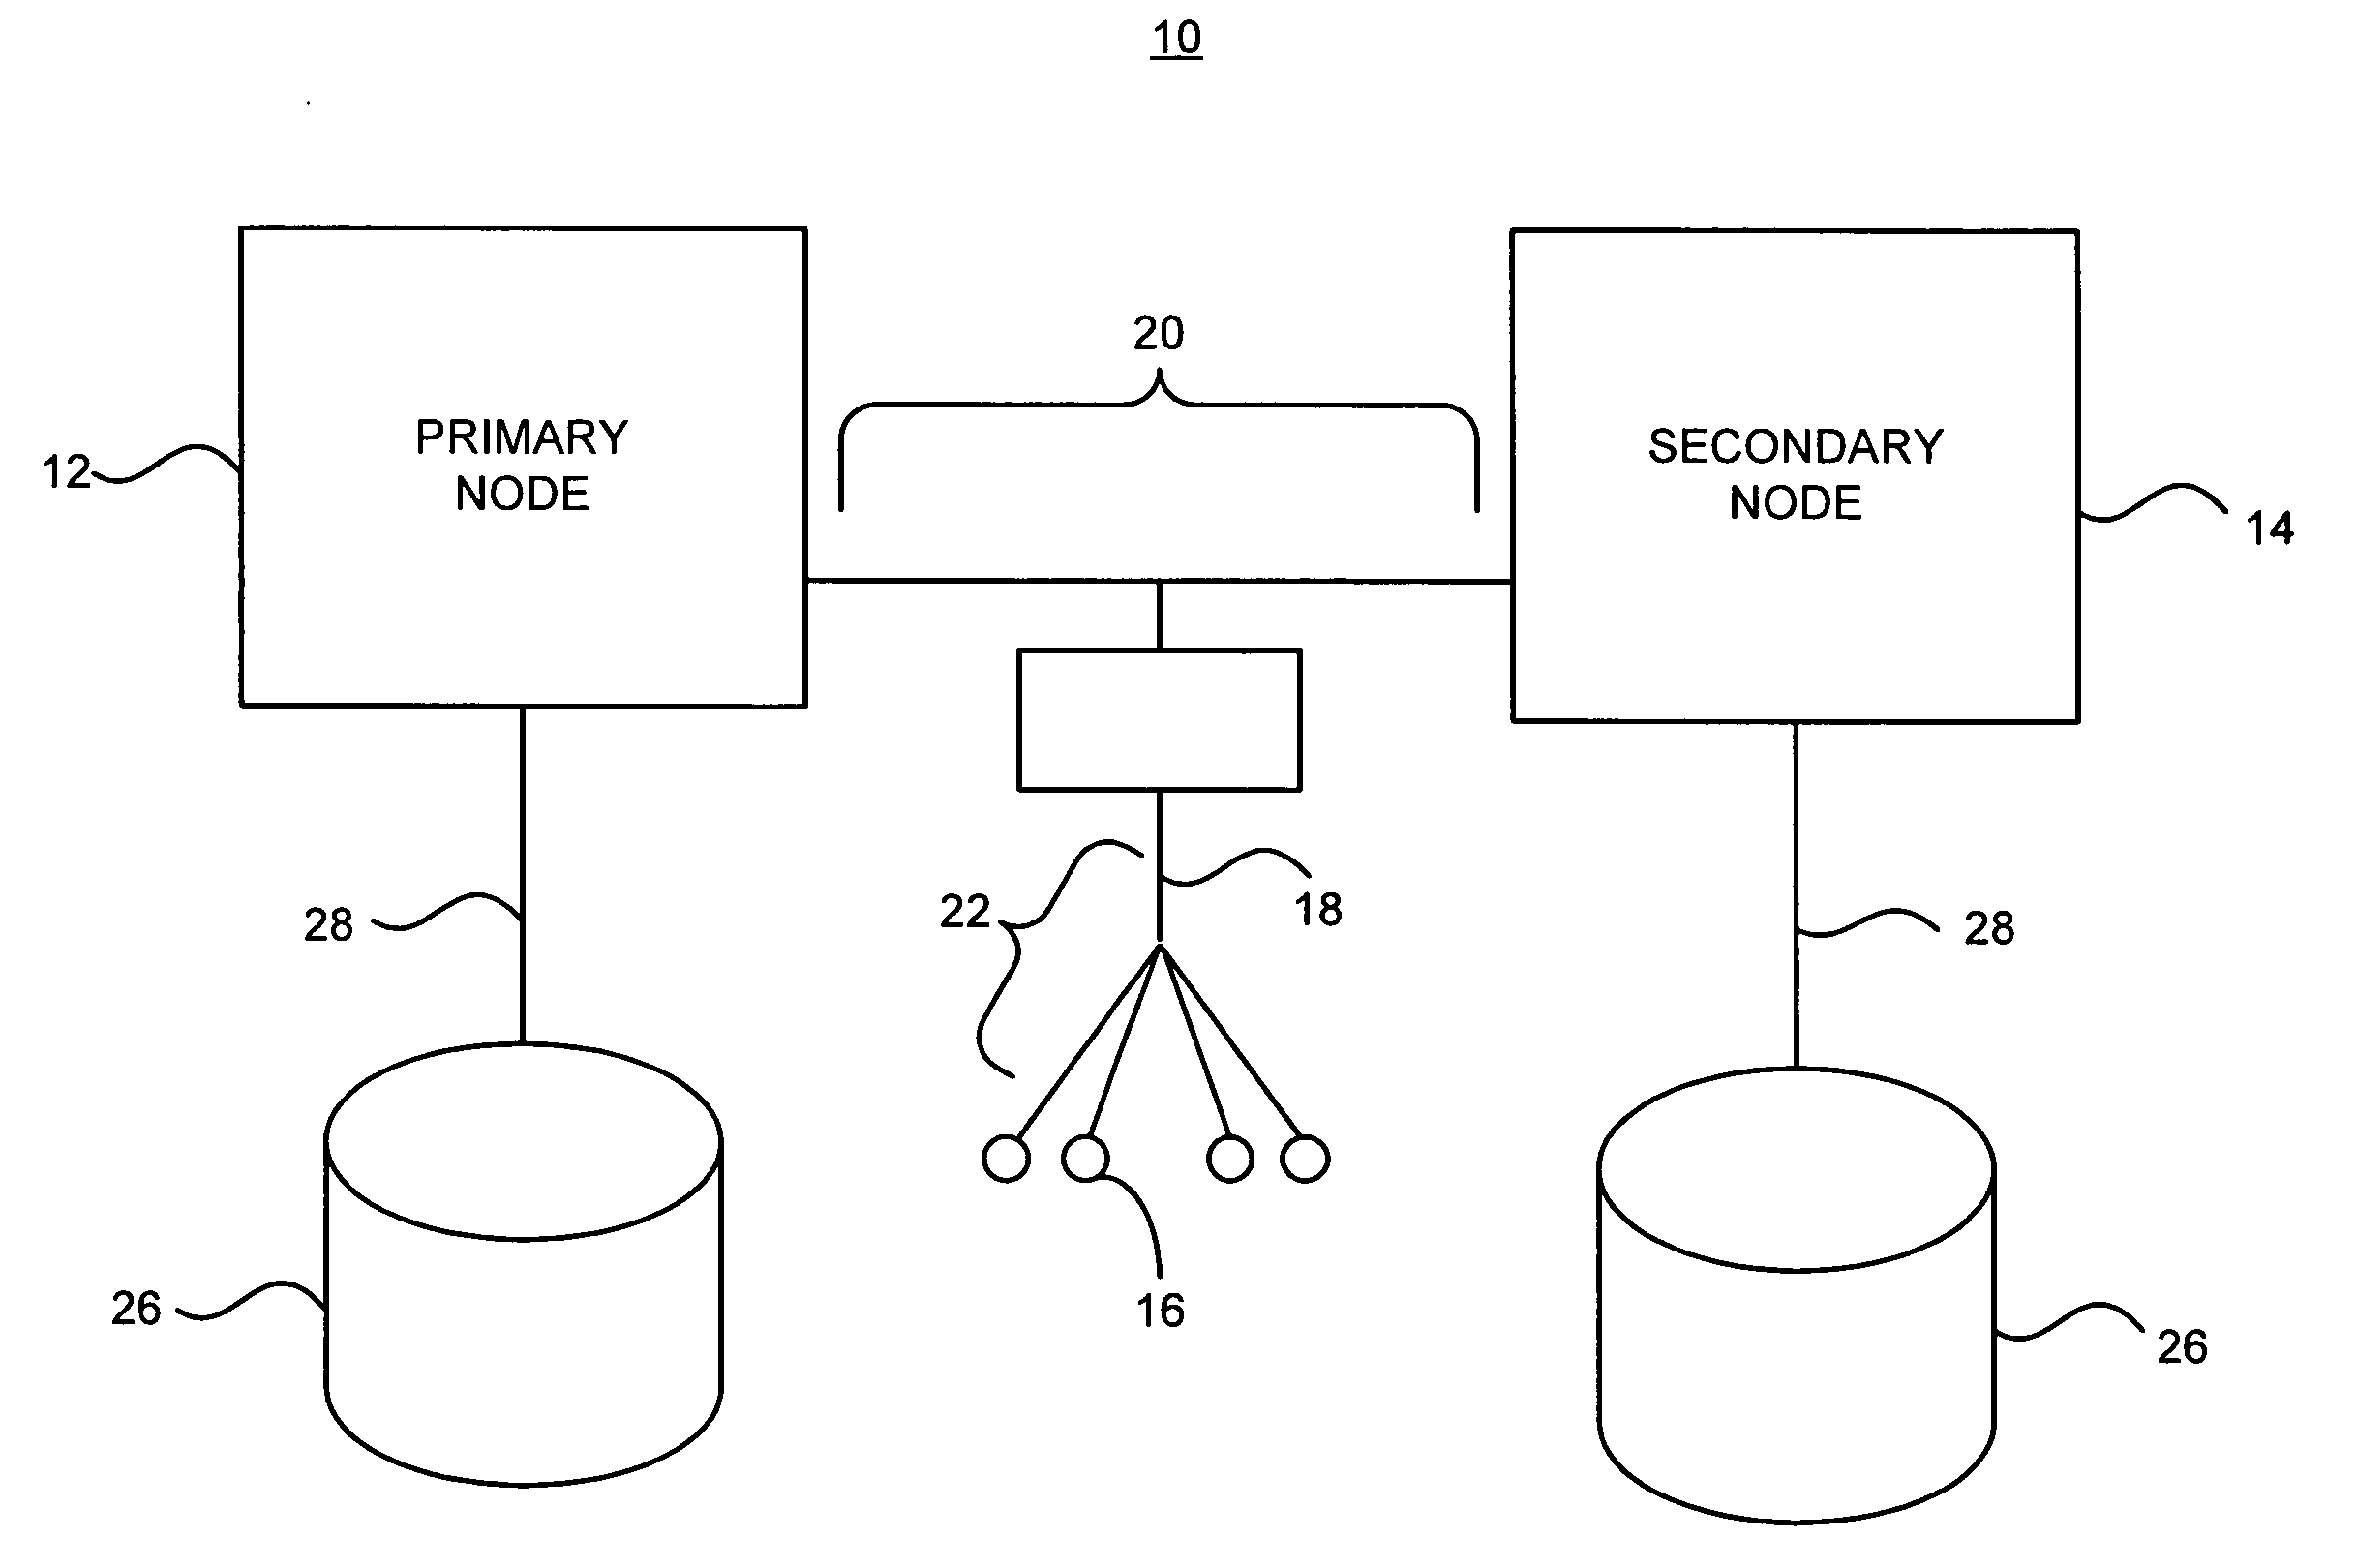 Method for auditing data integrity in a high availability database